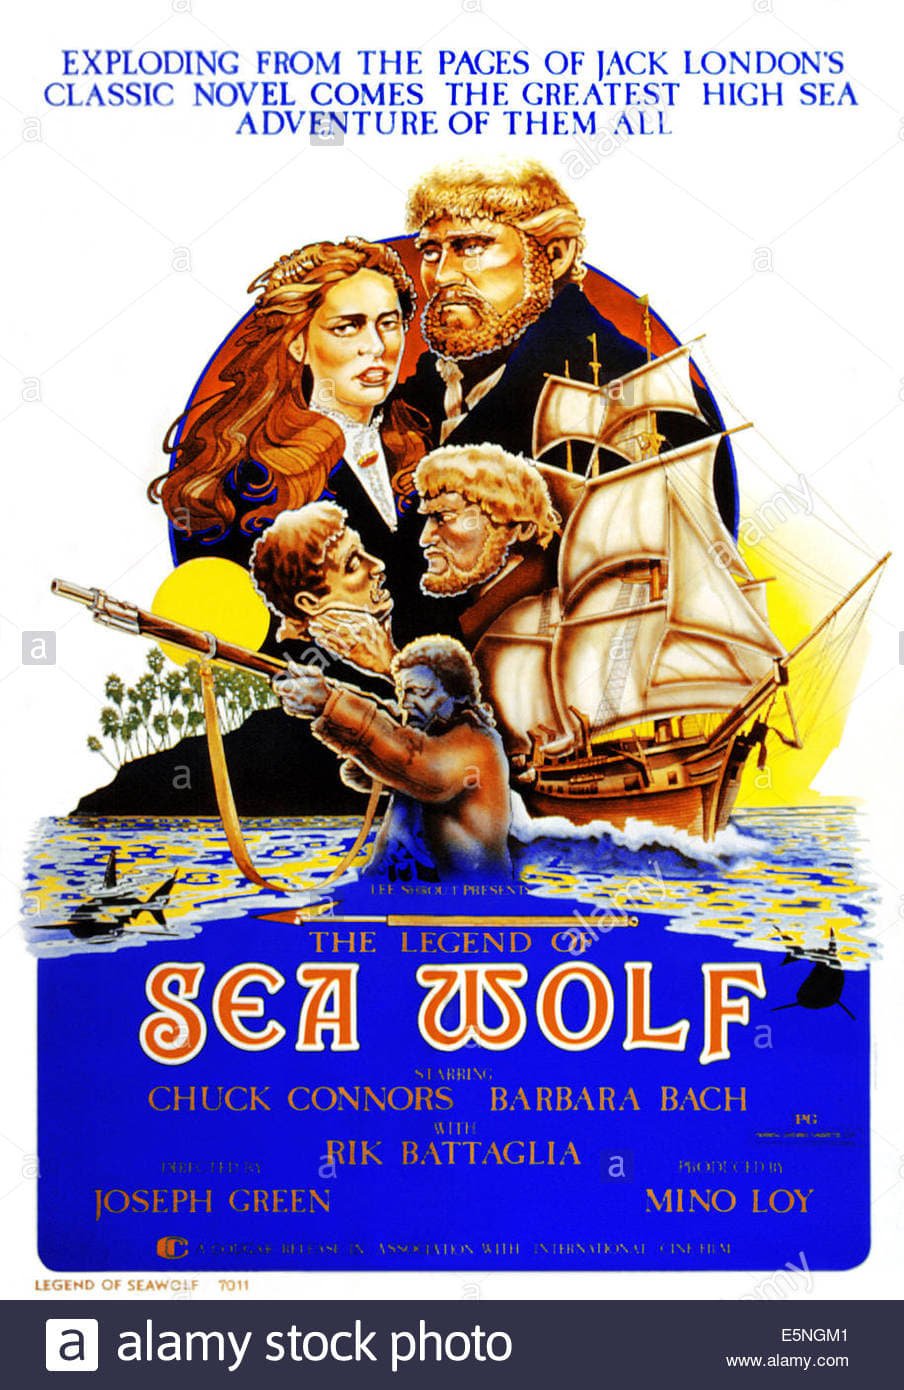 Legend of the Sea Wolf (1975)